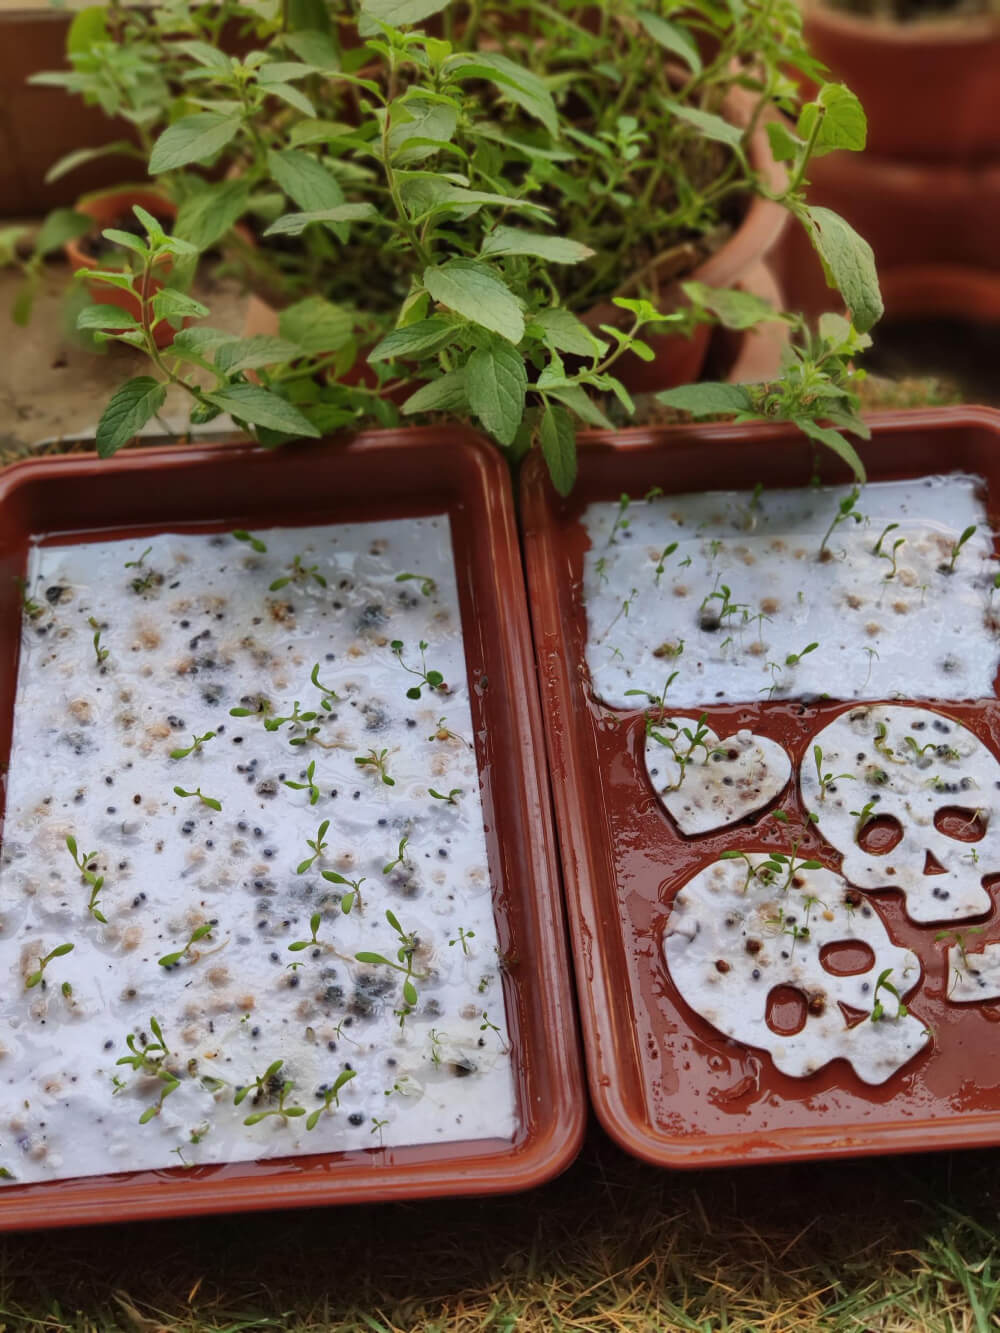 seed paper growing in clay trays in the garden